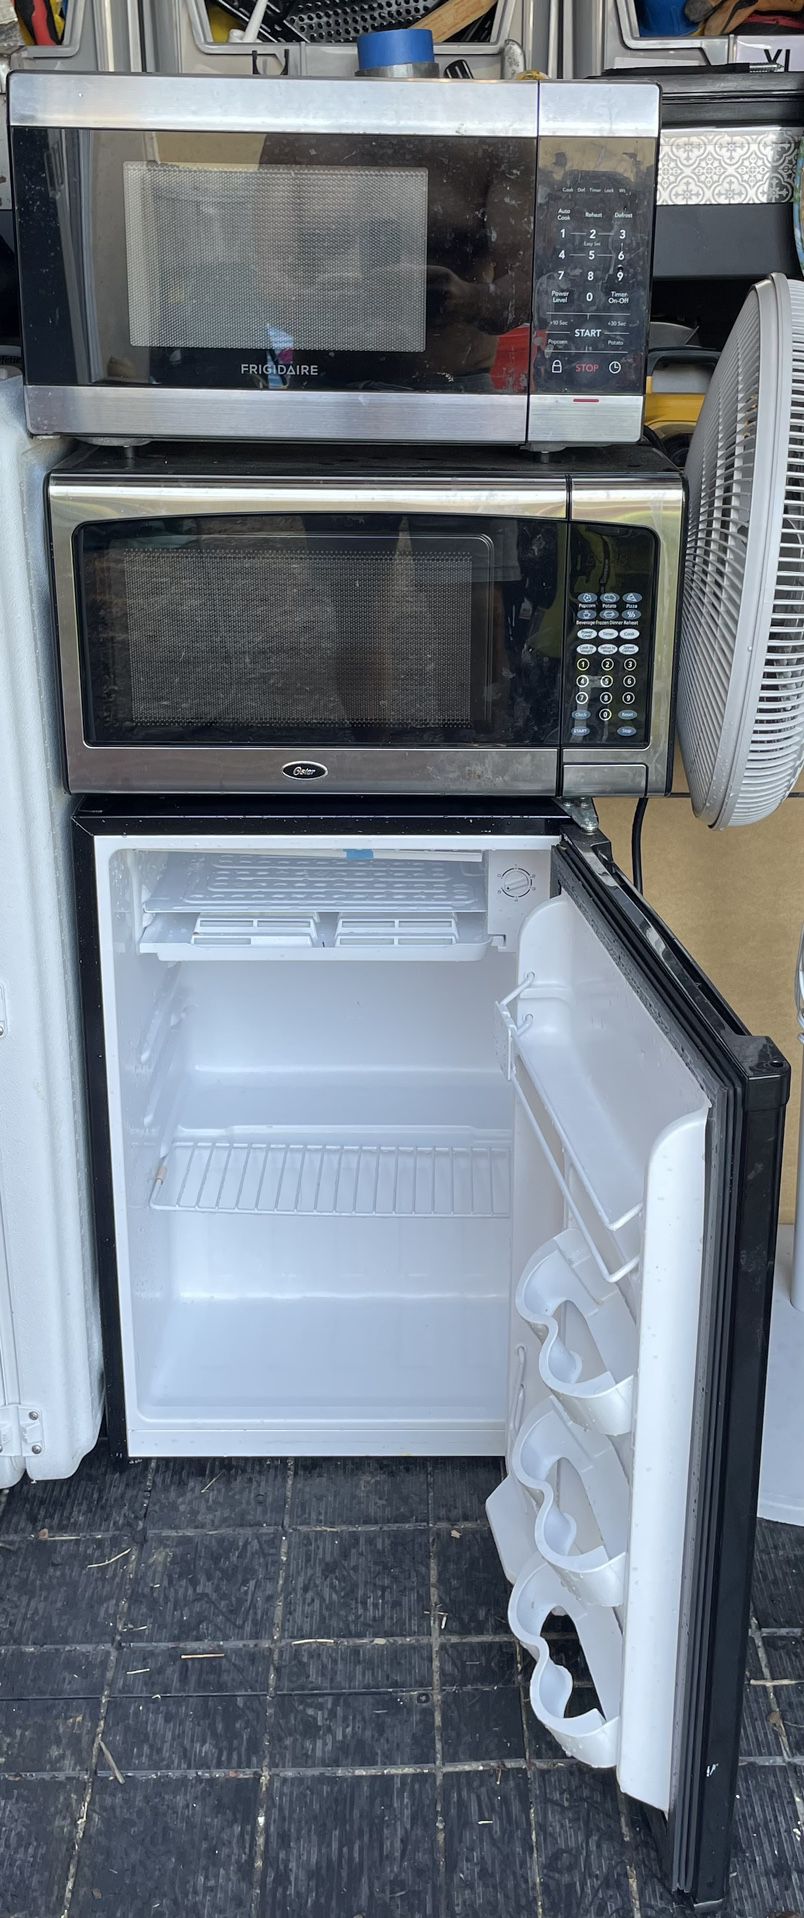 Two Microwaves and a Fridge